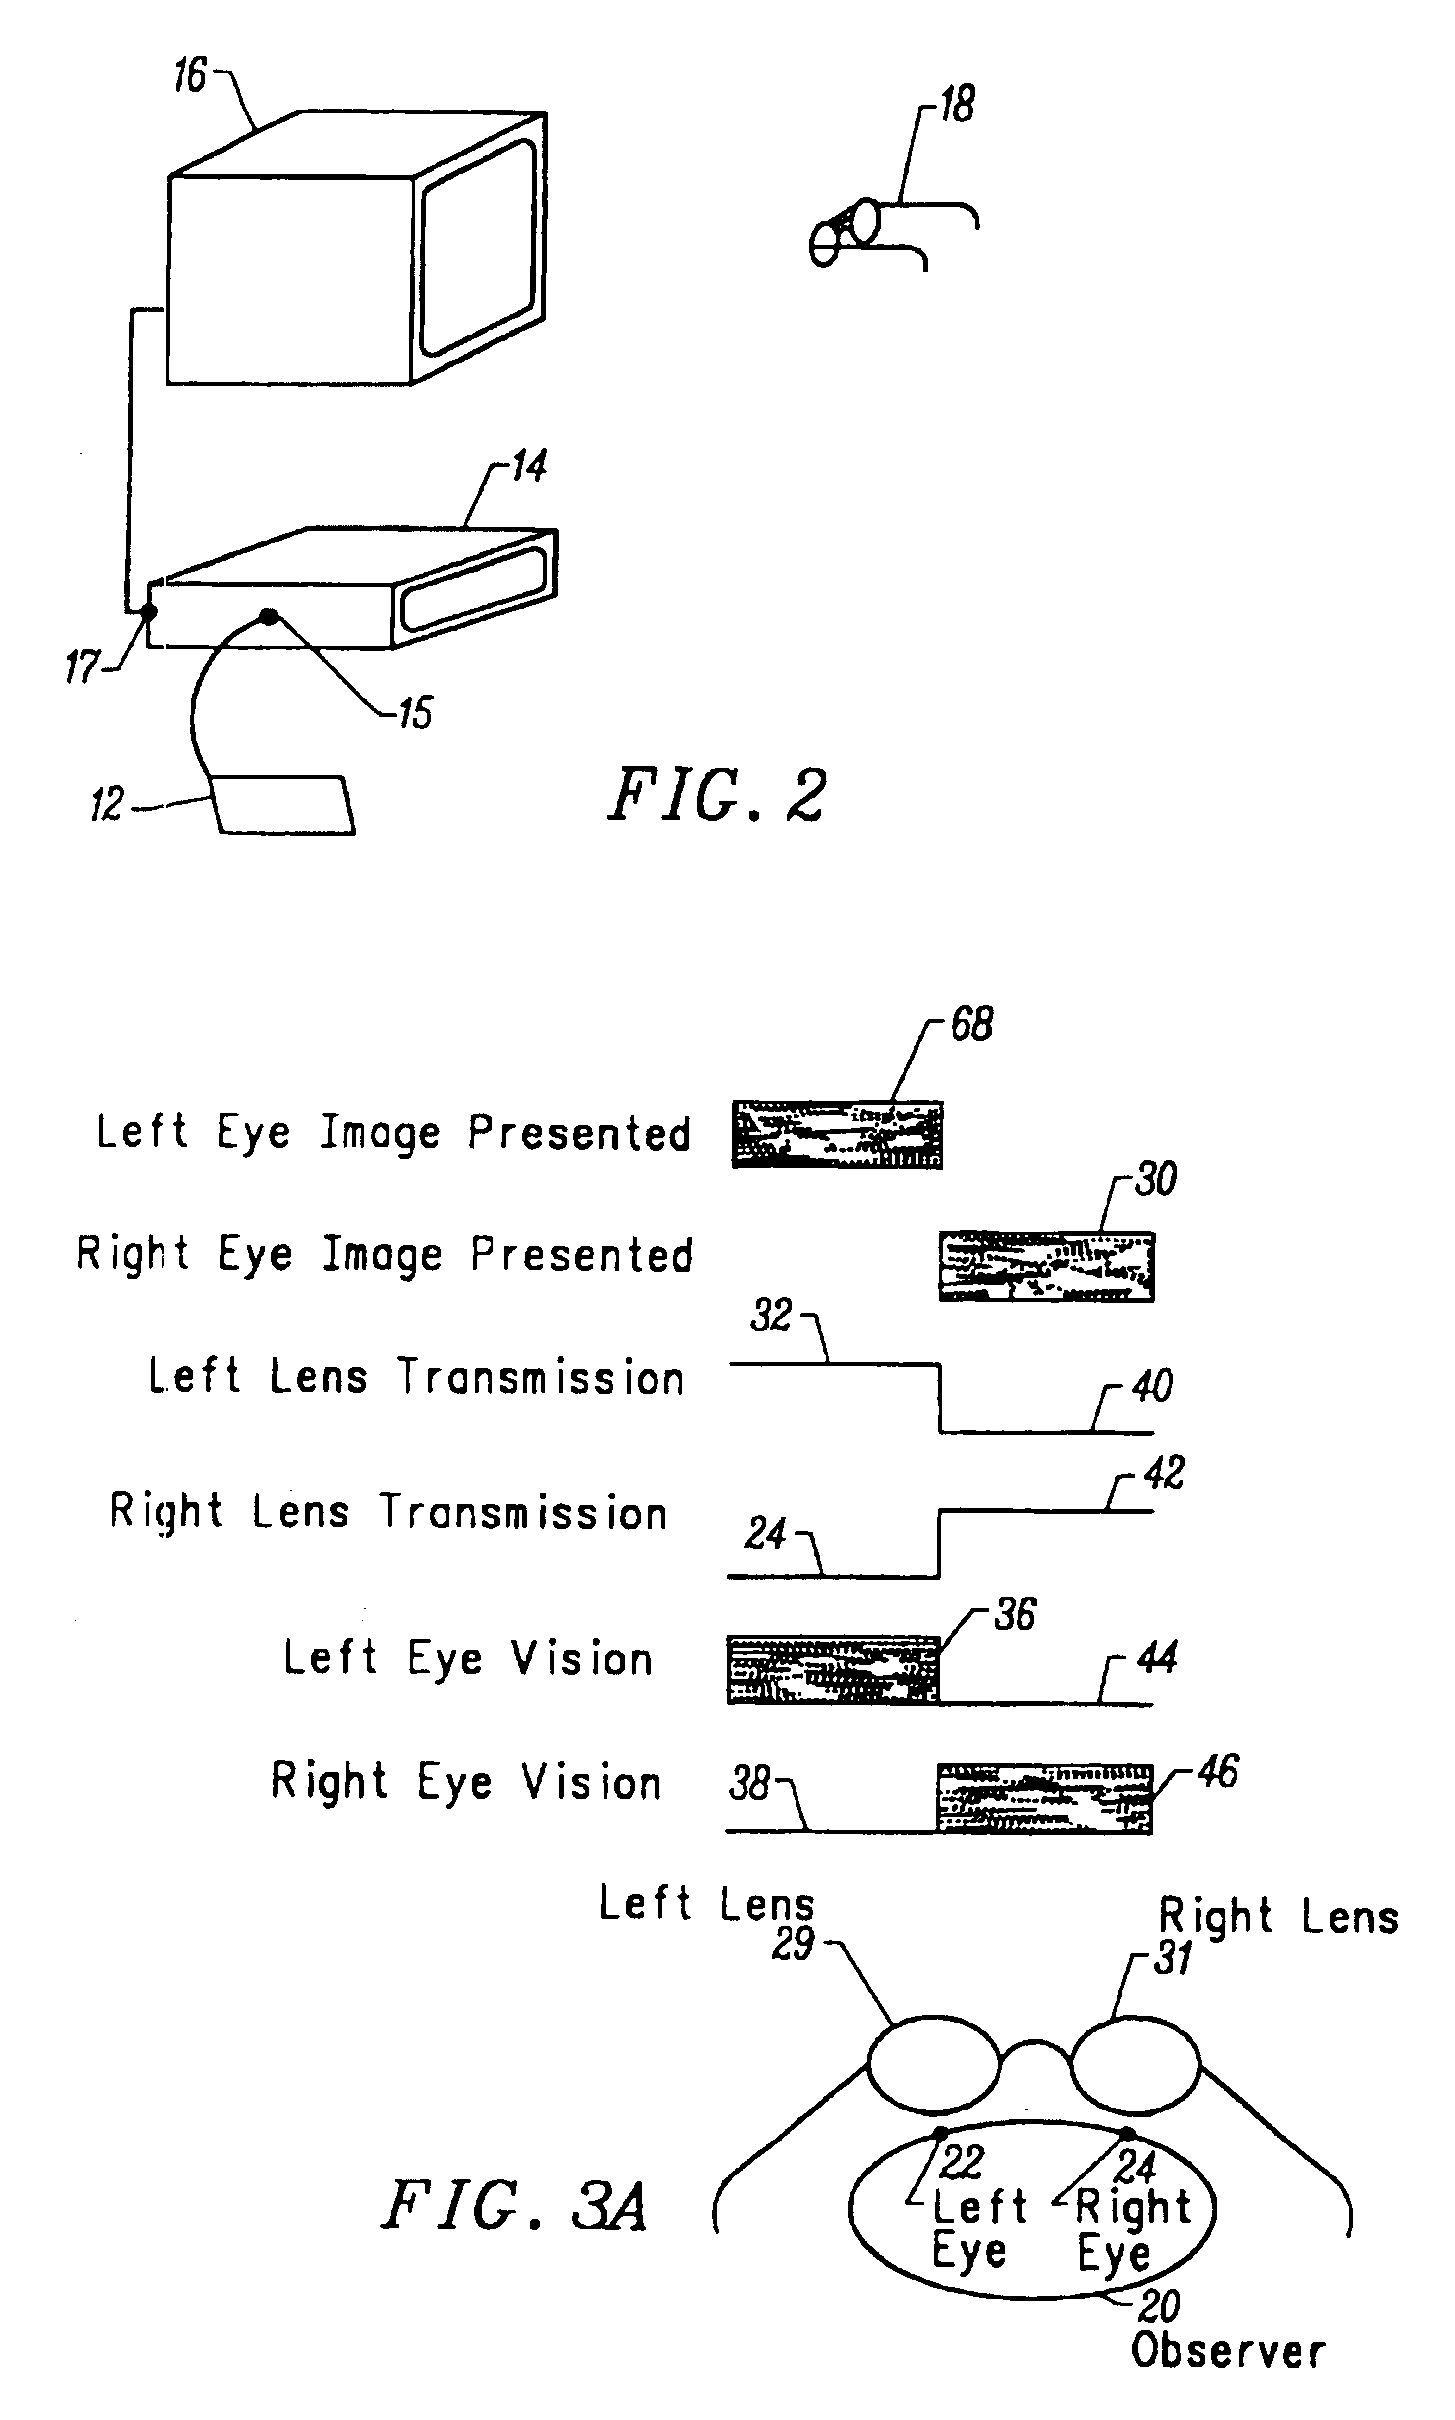 Method for producing a synthesized stereoscopic image